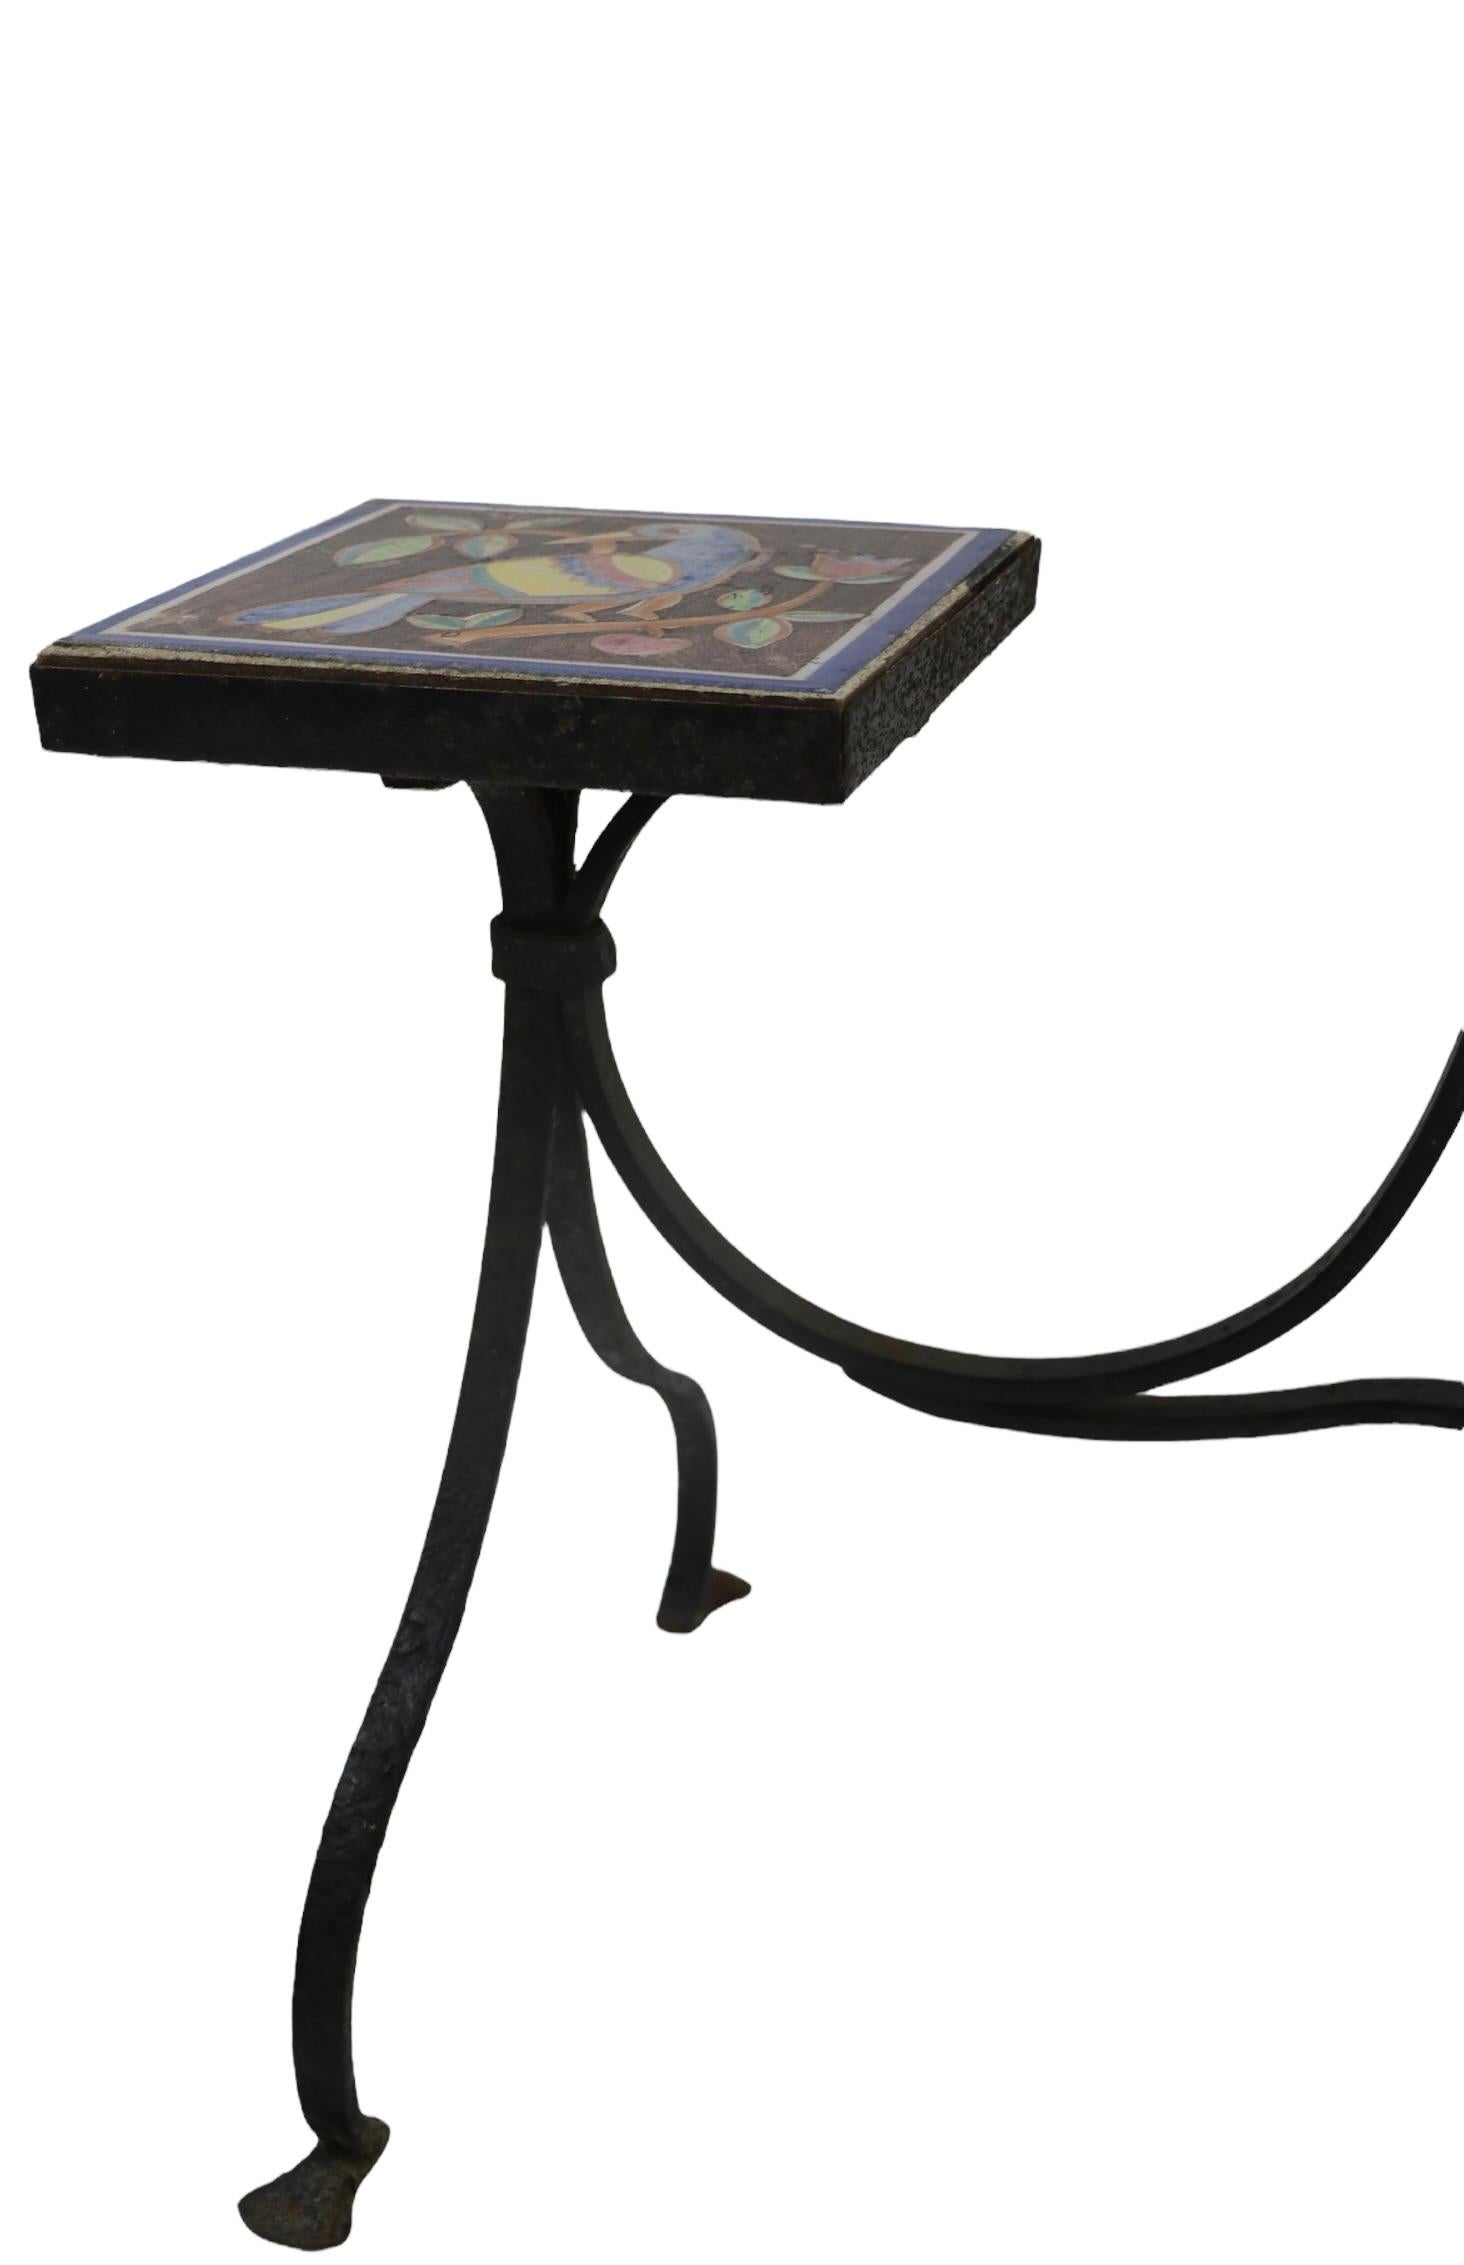 Charming and well executed three branch wrought iron plant stand, with original ceramic tile insert surfaces. The base is hand wrought iron, the tiles are attributed to ICS ( Industrial Ceramica Salernitana ) possibly by noted Italian ceramicist